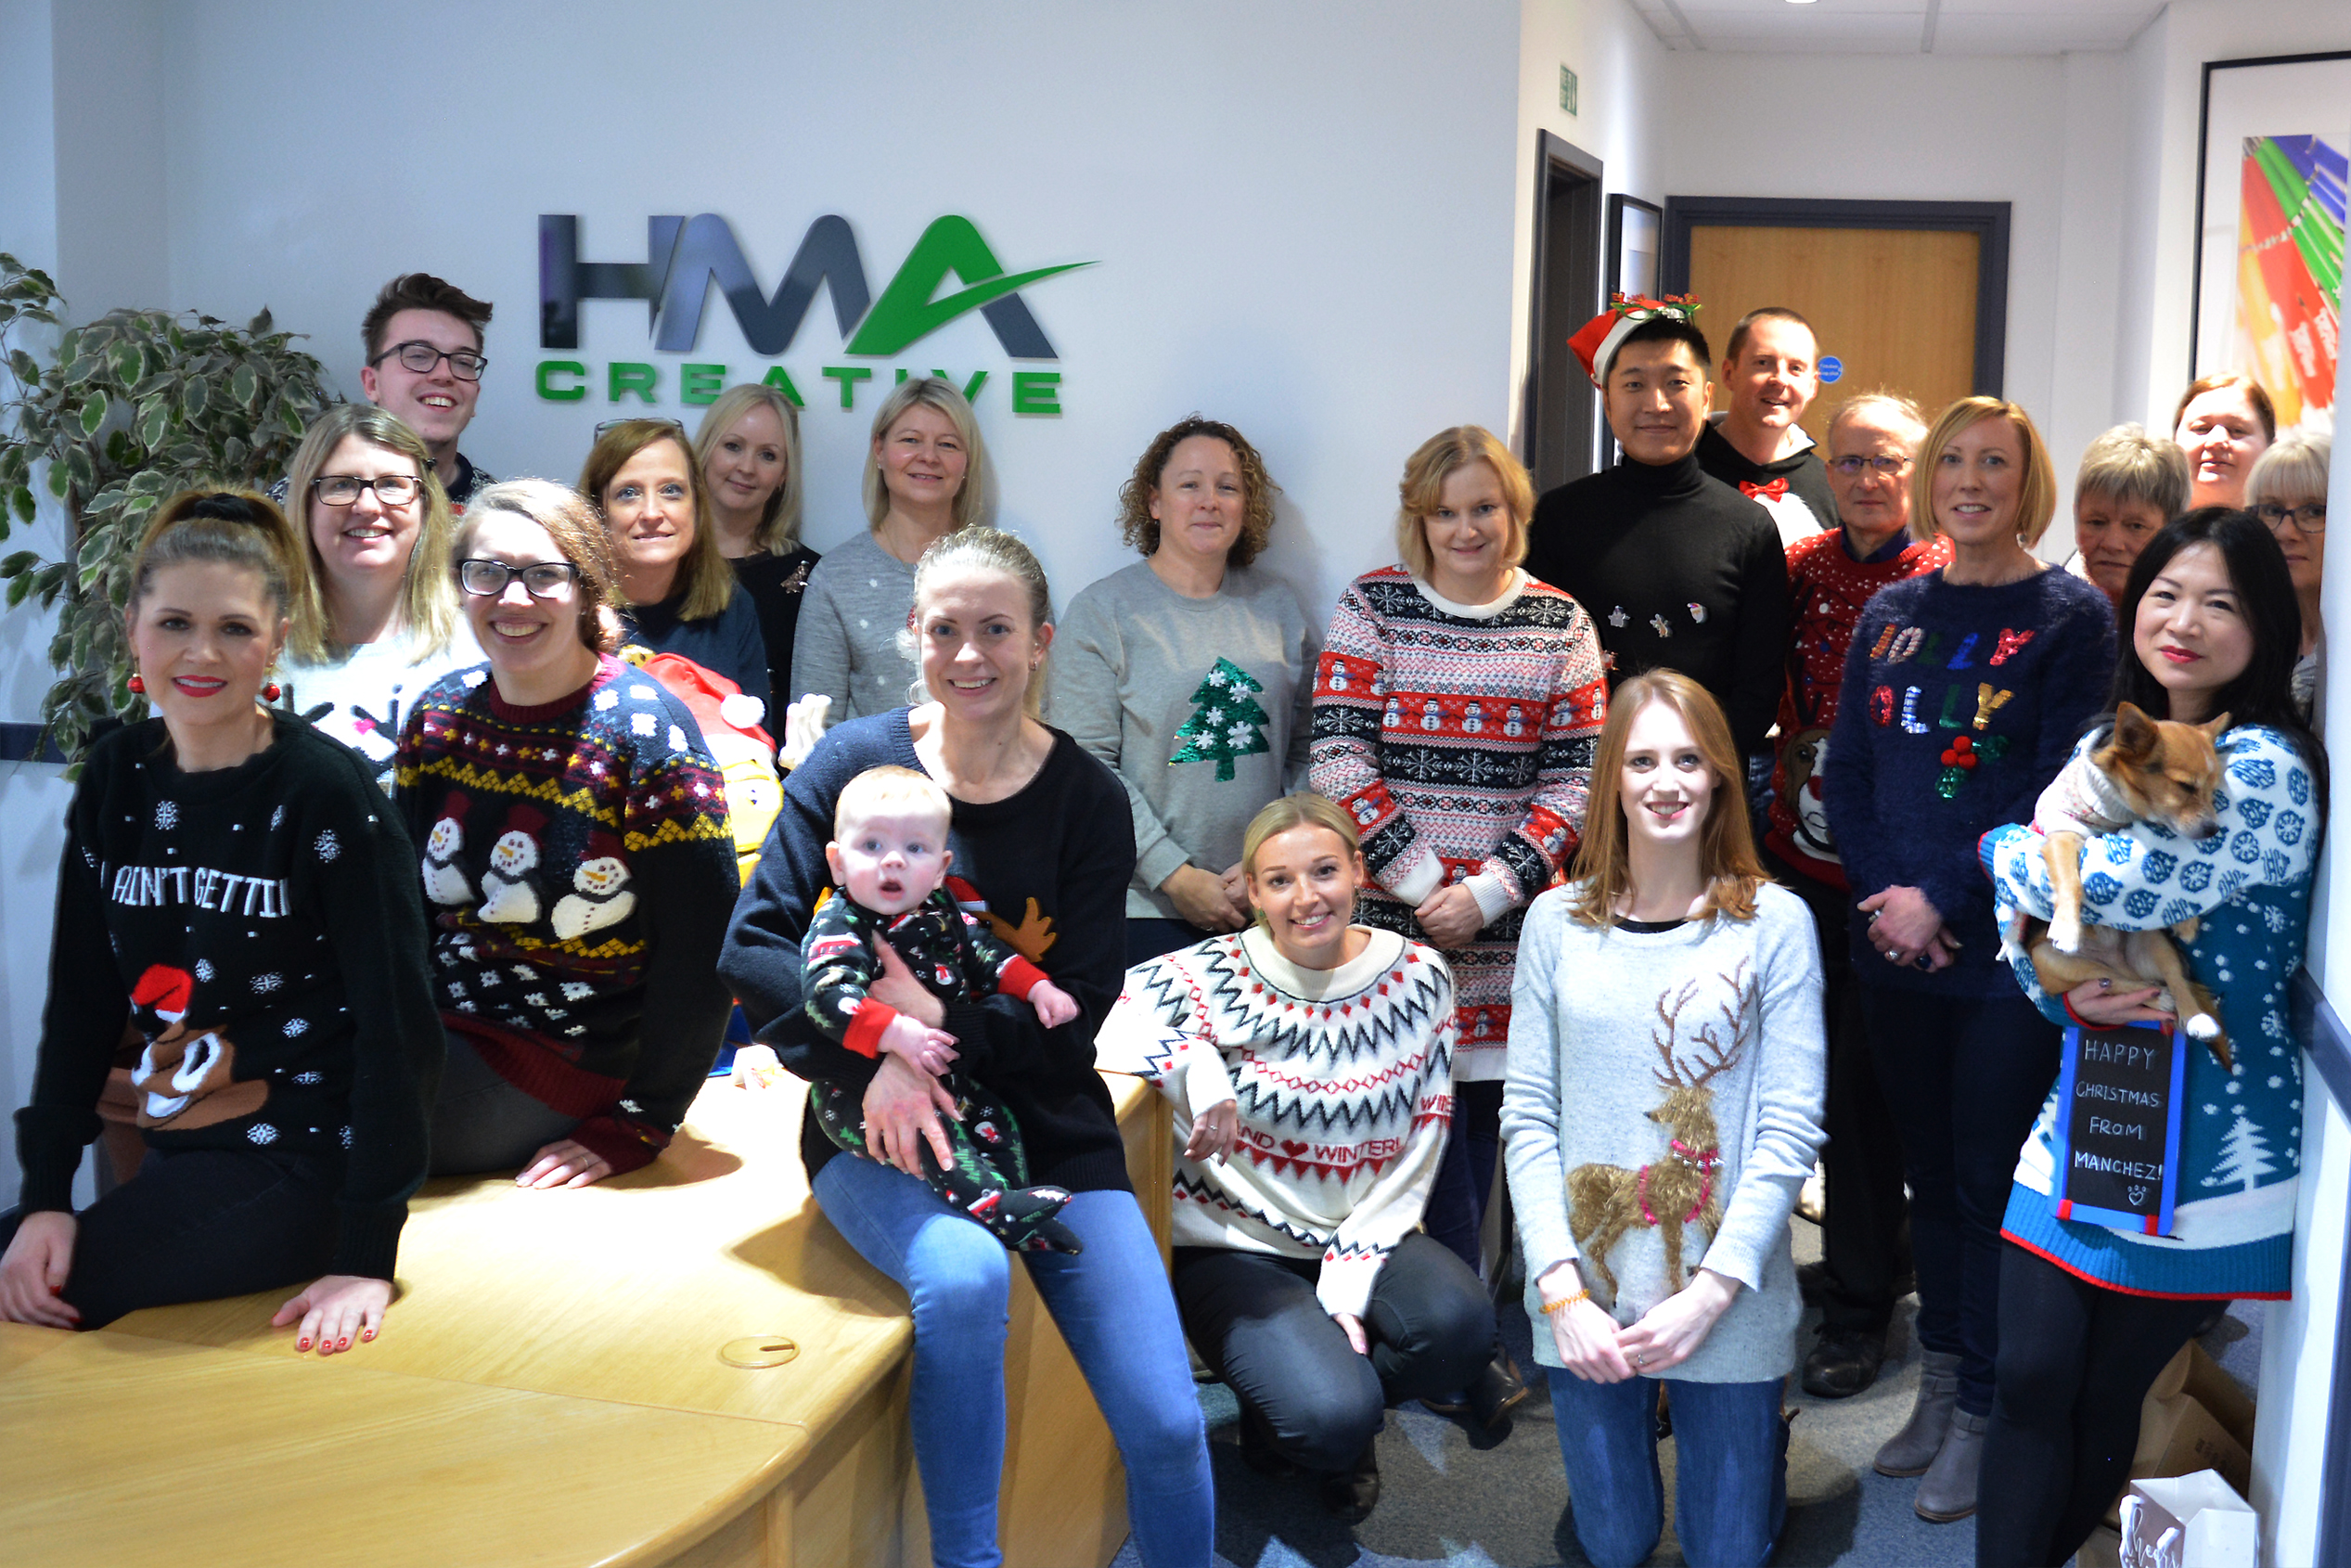 Merry Christmas from all of us at HMA Creative!